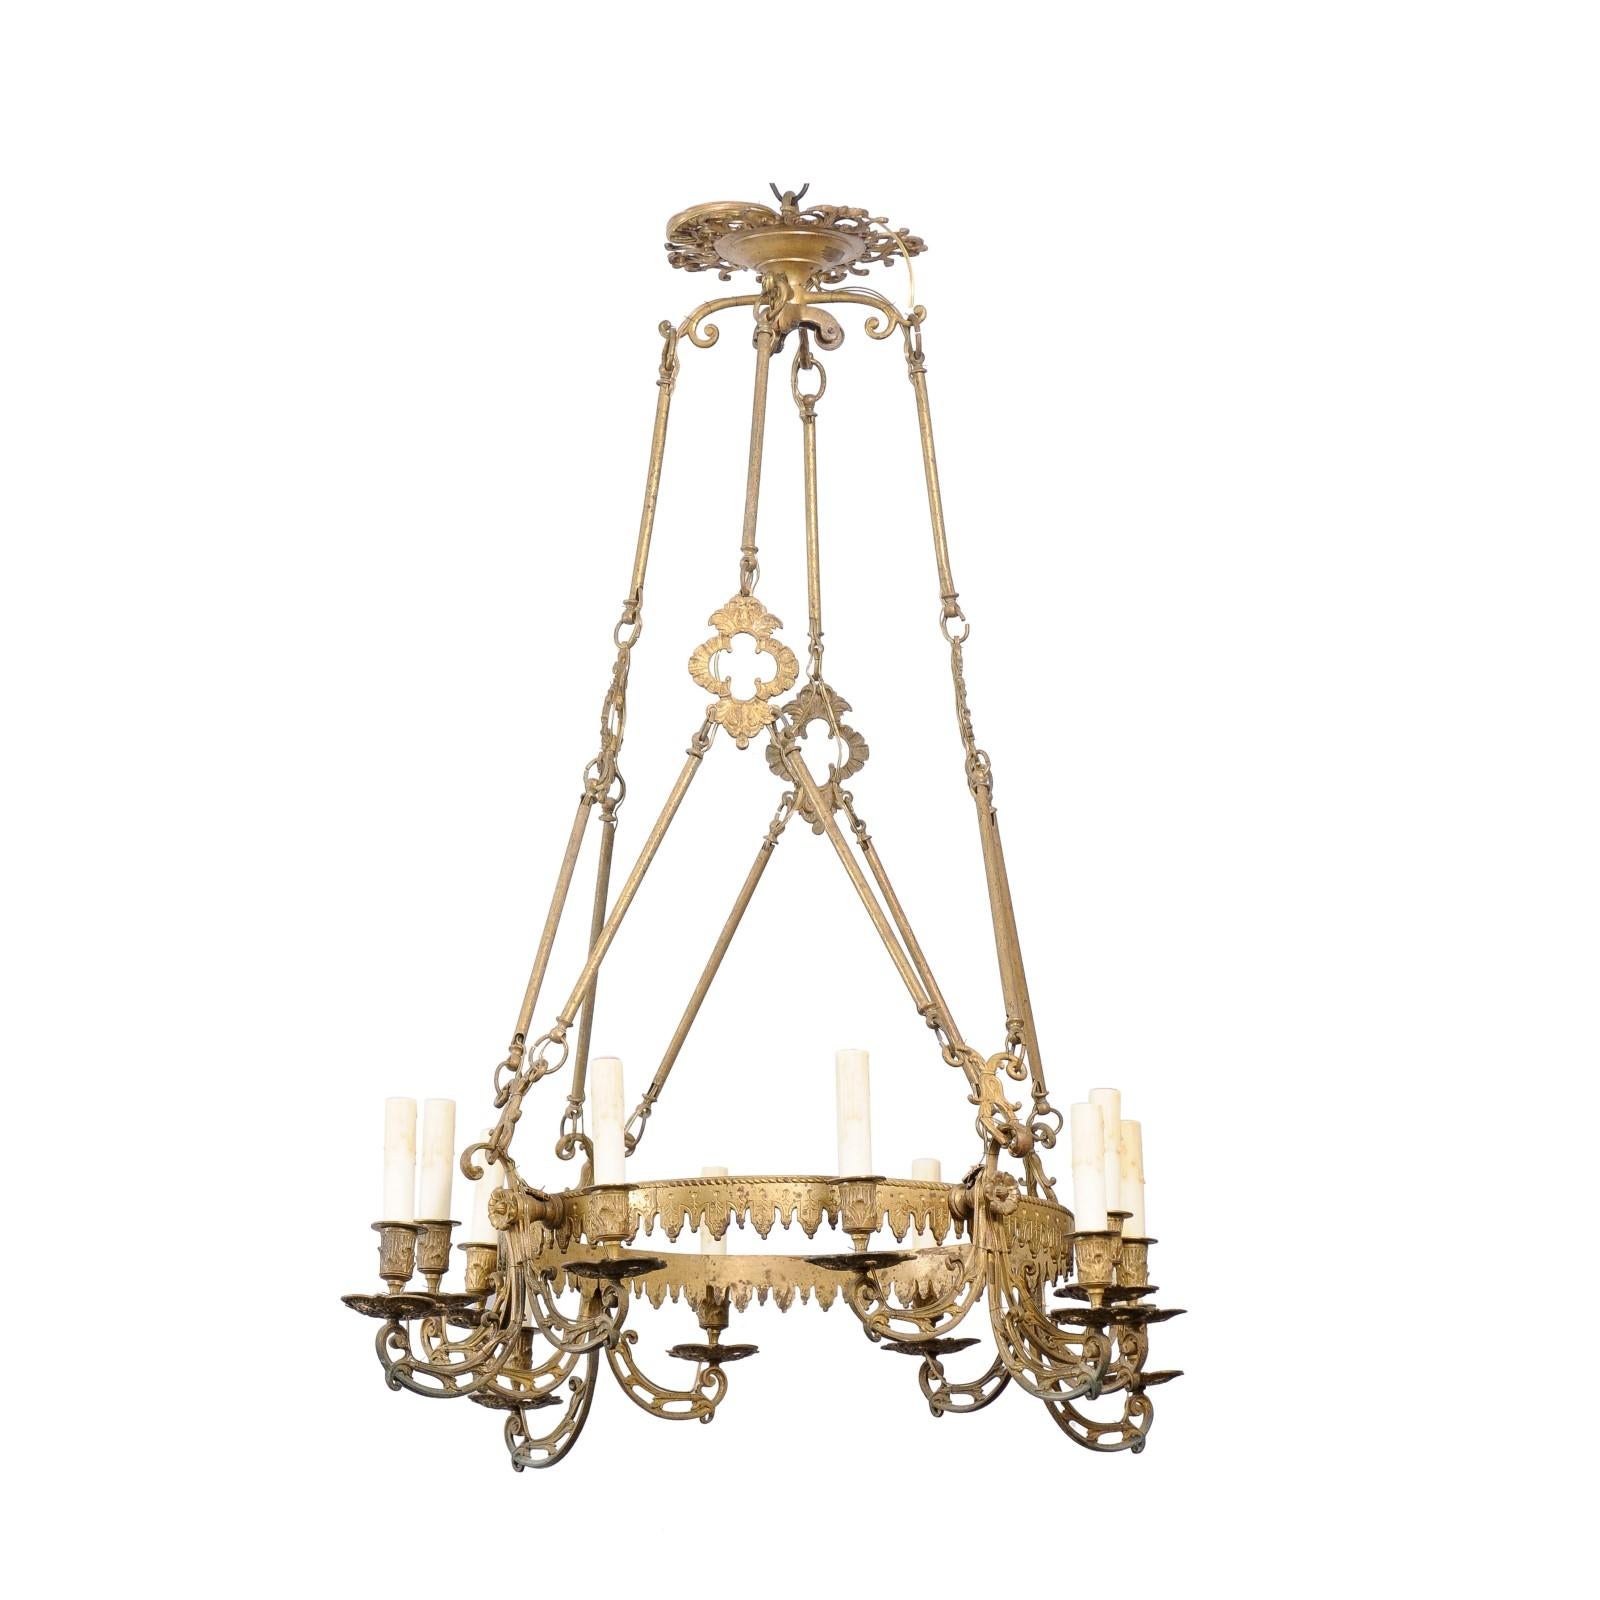 A French twelve light bronze ring chandelier from the 19th century with scrolling arms, foliage and floral motifs and profile links. This exquisite French twelve-light bronze ring chandelier from the 19th century stands as a timeless beacon of